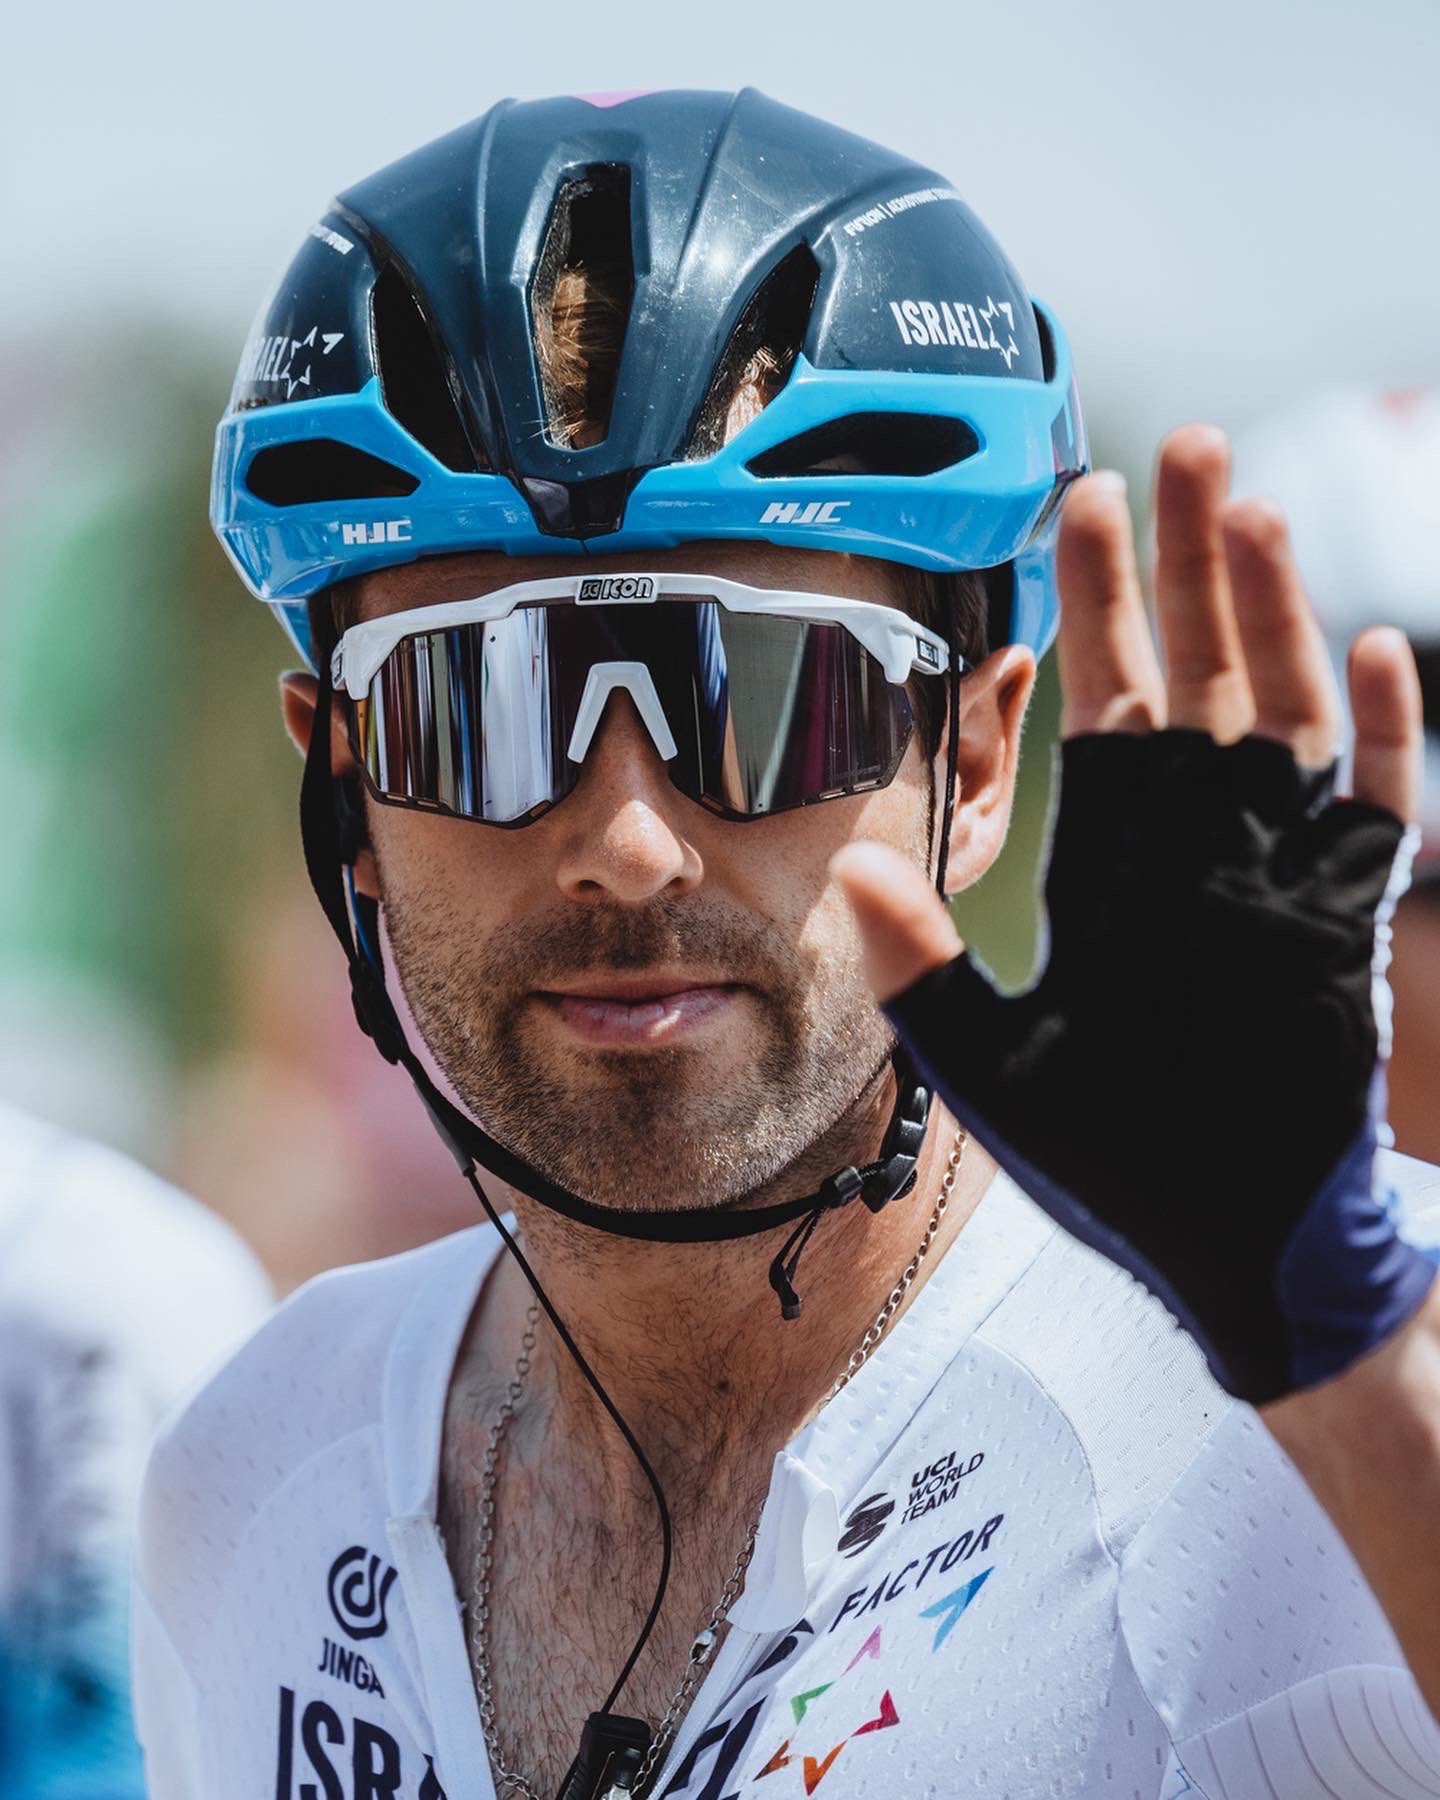 Alex Dowsett on Twitter: "I feel I need to apologise for my actions today, my glasses inside helmet straps for stage. Normally this would be rectified but the stage was